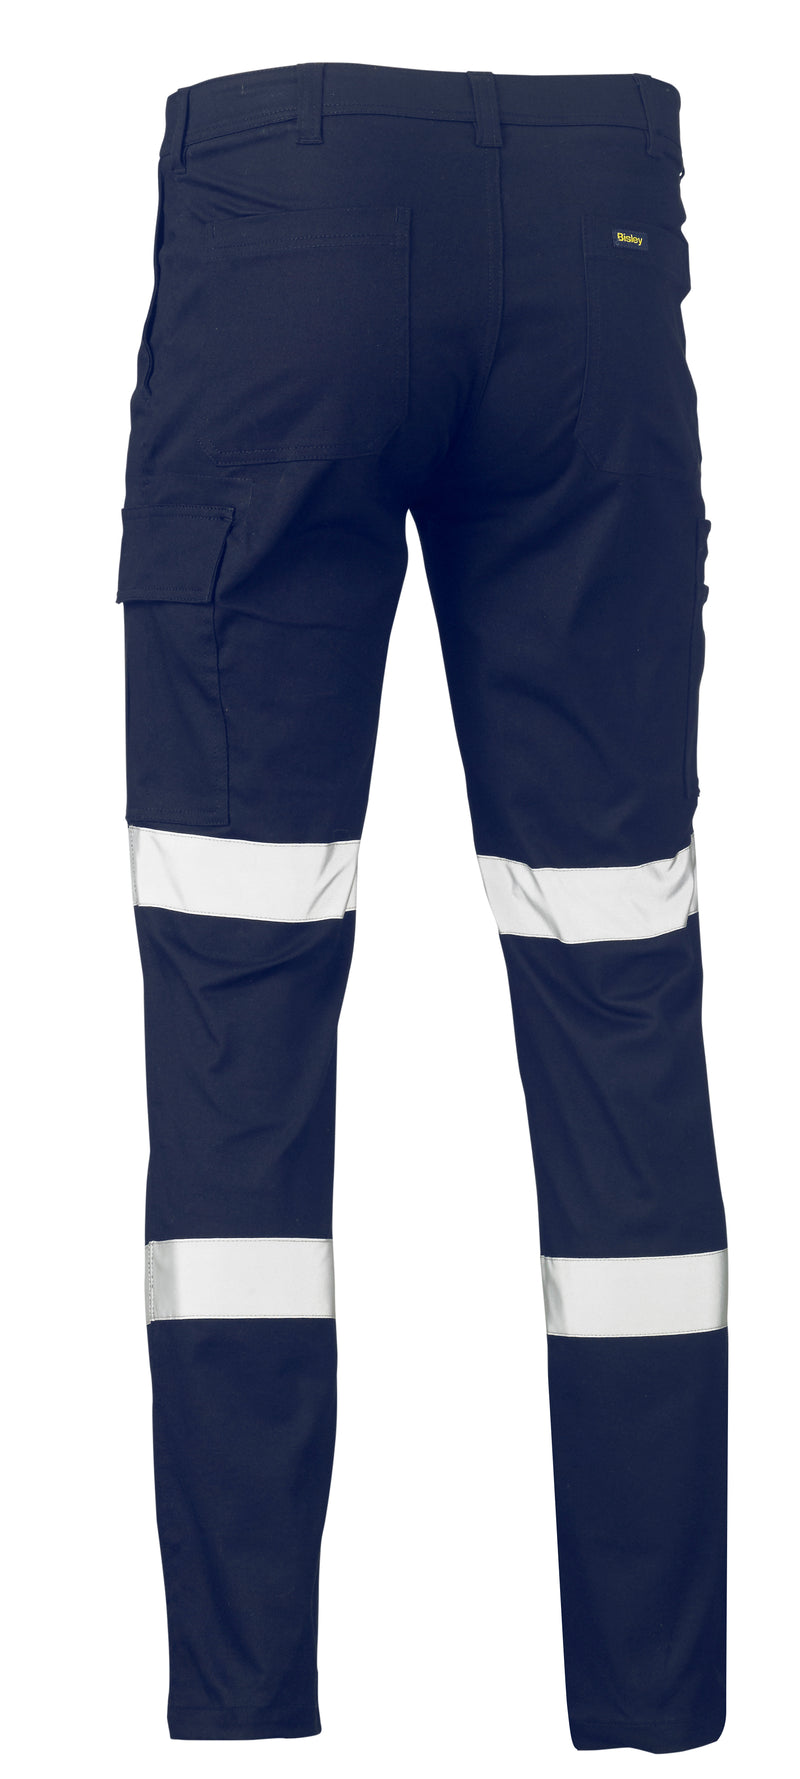 Load image into Gallery viewer, Wholesale BPC6008T Bisley Taped Biomotion Stretch Cotton Drill Cargo Pants - Regular Printed or Blank
